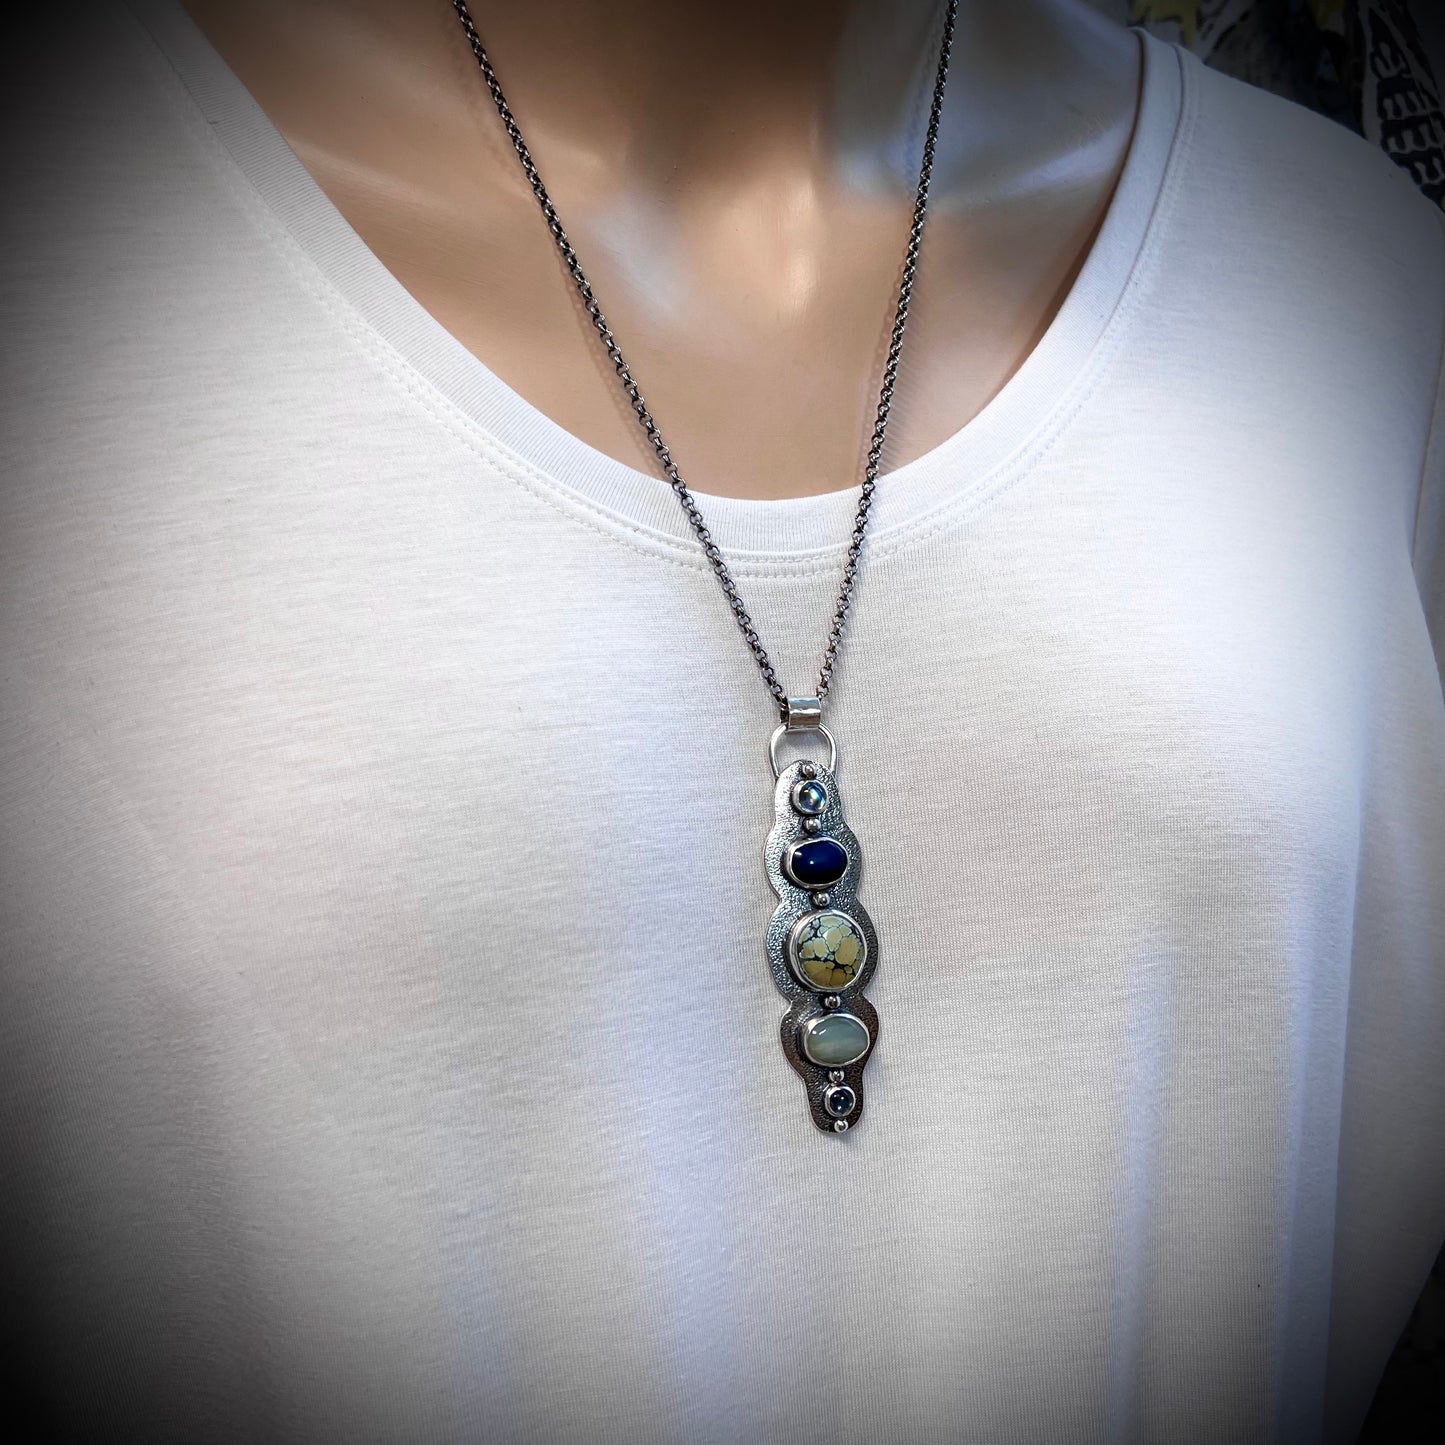 Rainbow Moonstone, Peruvian Opal, Turquoise, and Labradorite Sterling Silver Handmade One-of-a-kind Pendant Necklace